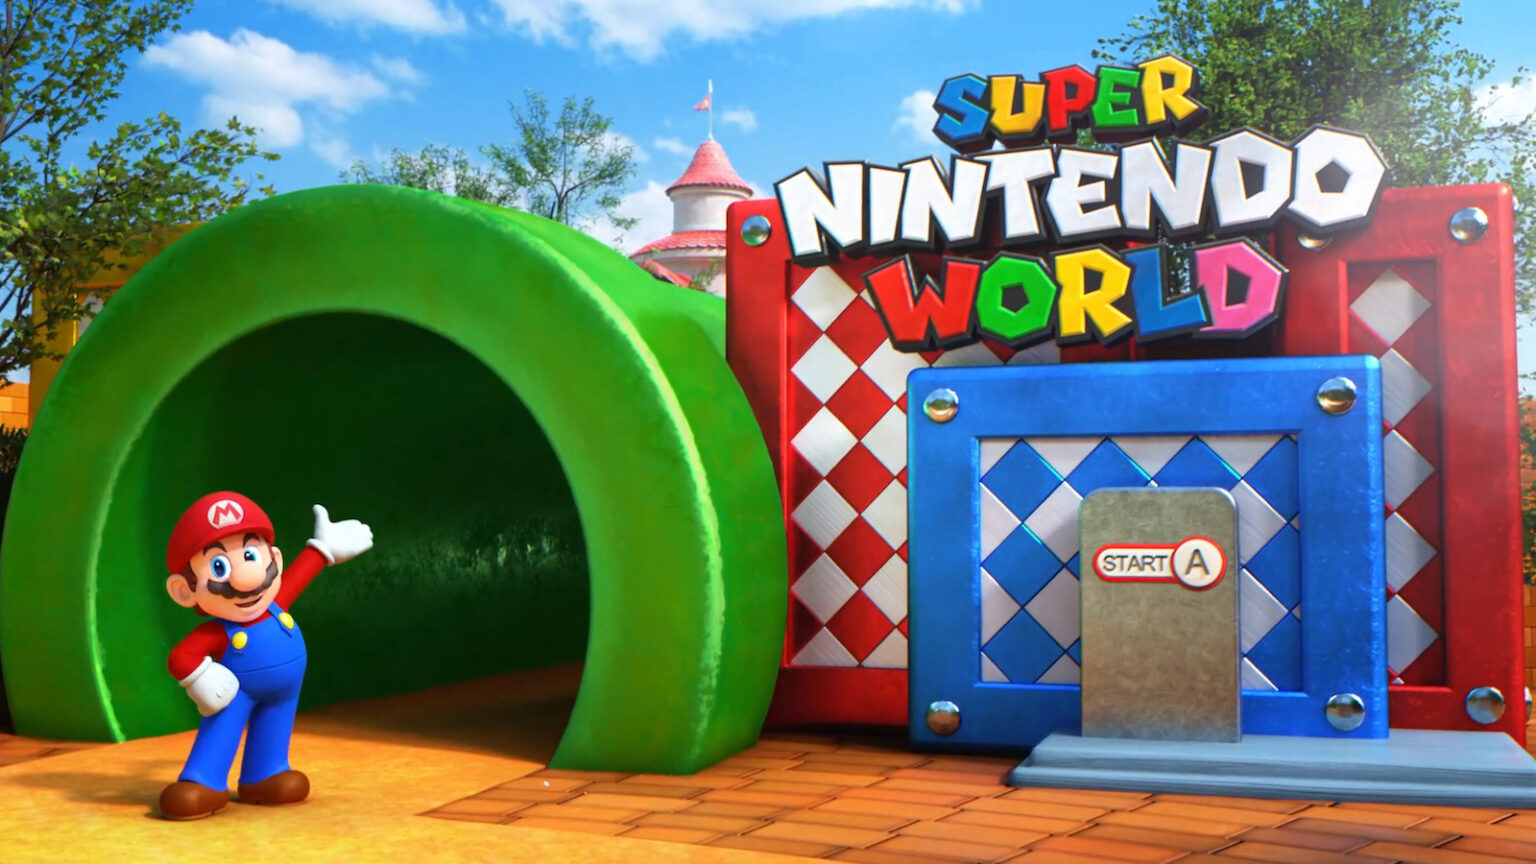 Relive some childhood fantasies and discover what’s happening with the U.S. version of Super Nintendo World.